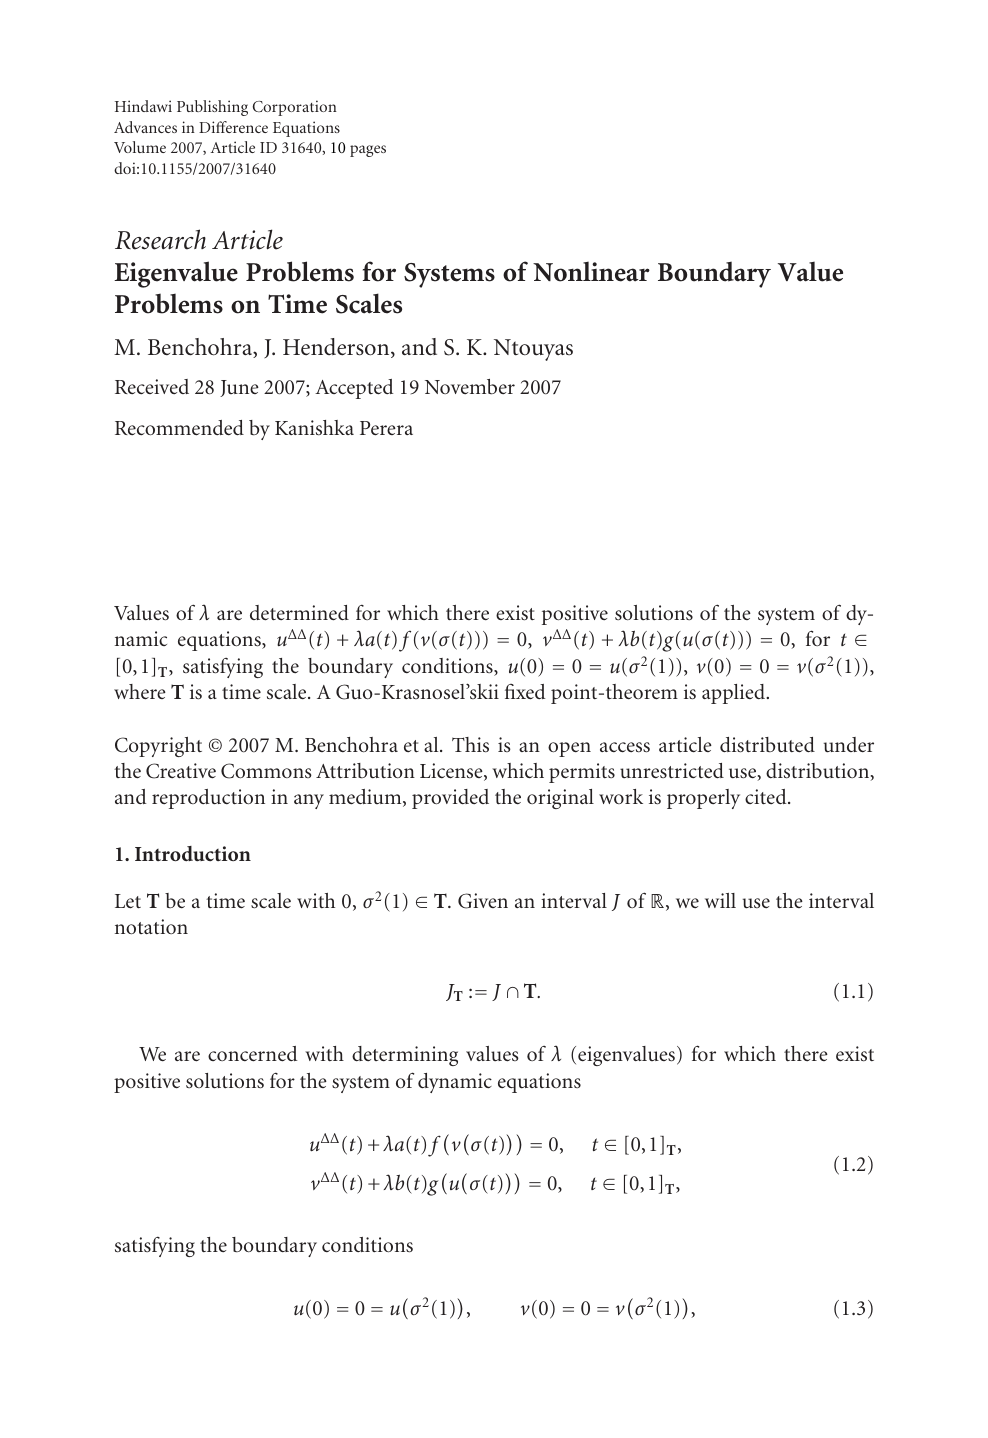 Eigenvalue Problems For Systems Of Nonlinear Boundary Value Problems On Time Scales Topic Of Research Paper In Mathematics Download Scholarly Article Pdf And Read For Free On Cyberleninka Open Science Hub